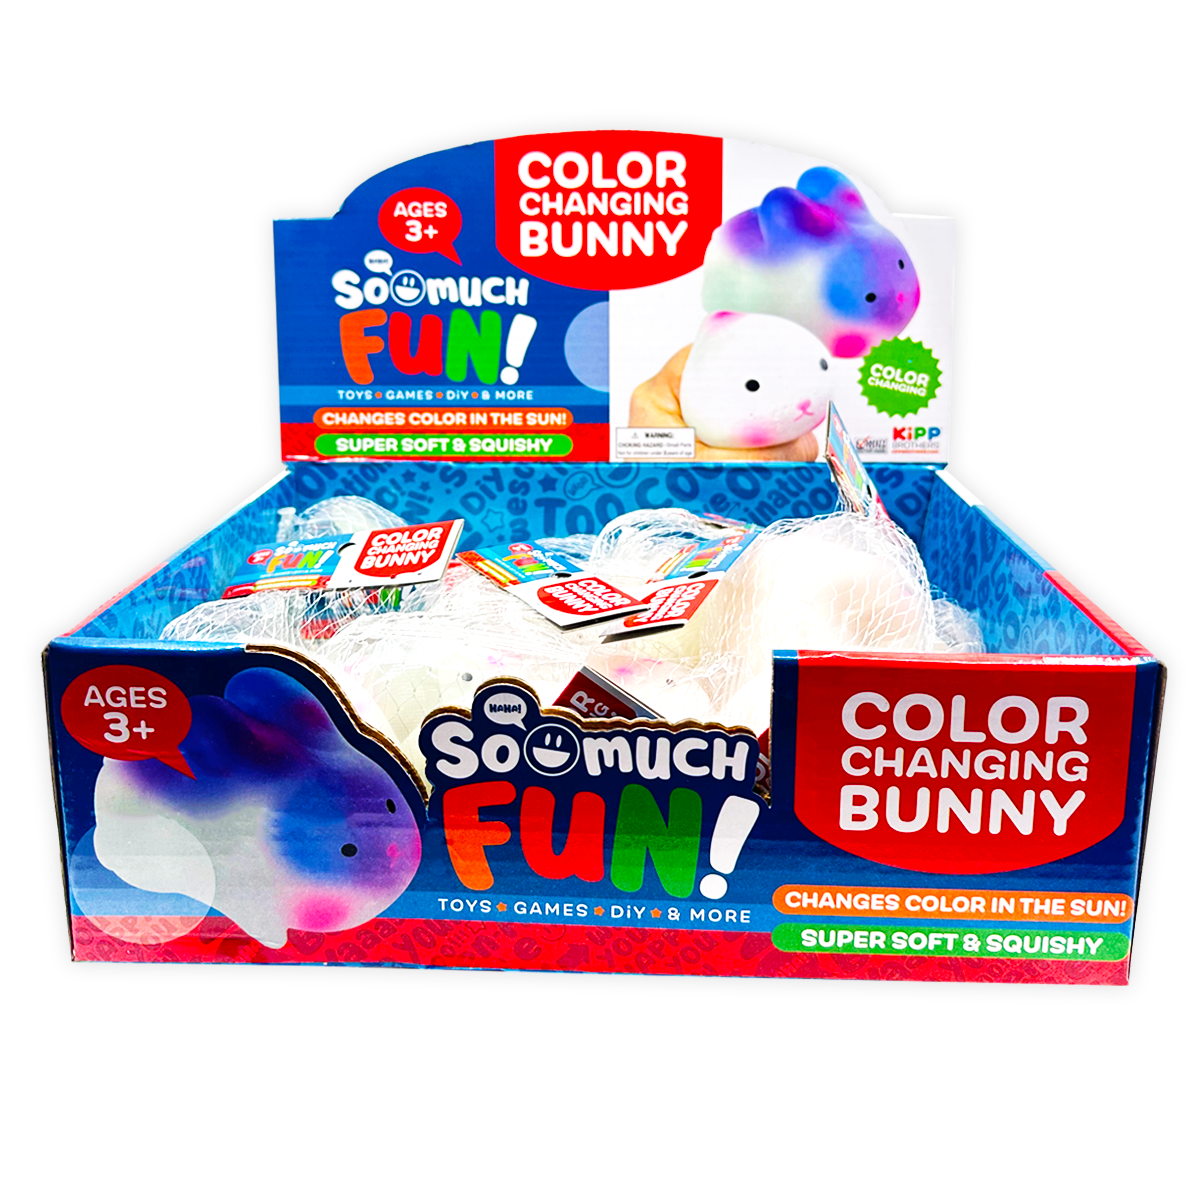 ITEM NUMBER 024766 COLOR CHANGING BUNNY 12 PIECES PER DISPLAY